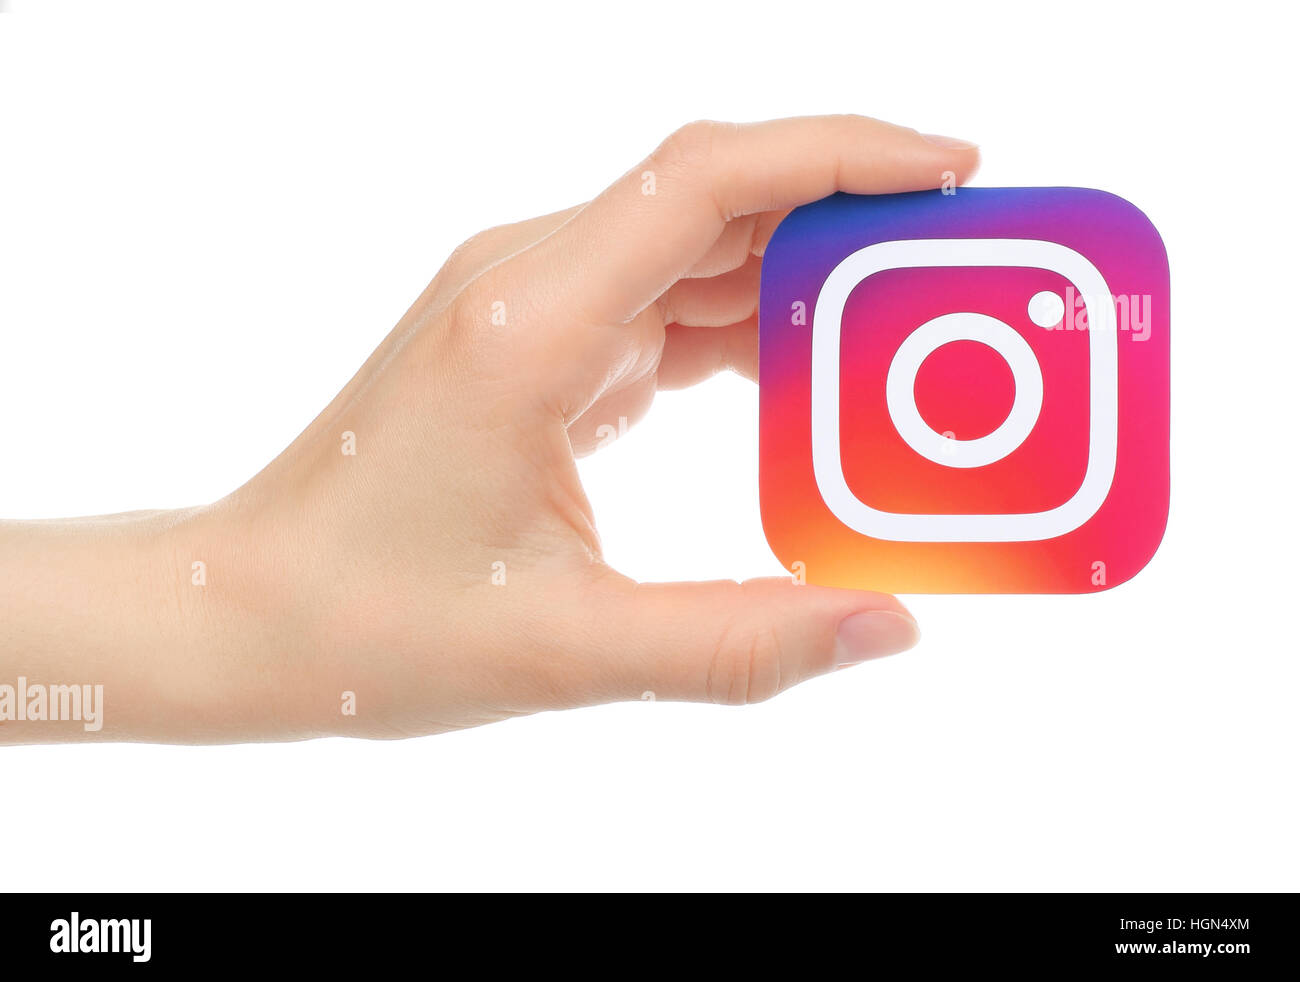 Kiev, Ukraine - May 17, 2016: Hand holds new Instagram logo printed on paper, on white background. Instagram is an online mobile photo-sharing, video- Stock Photo